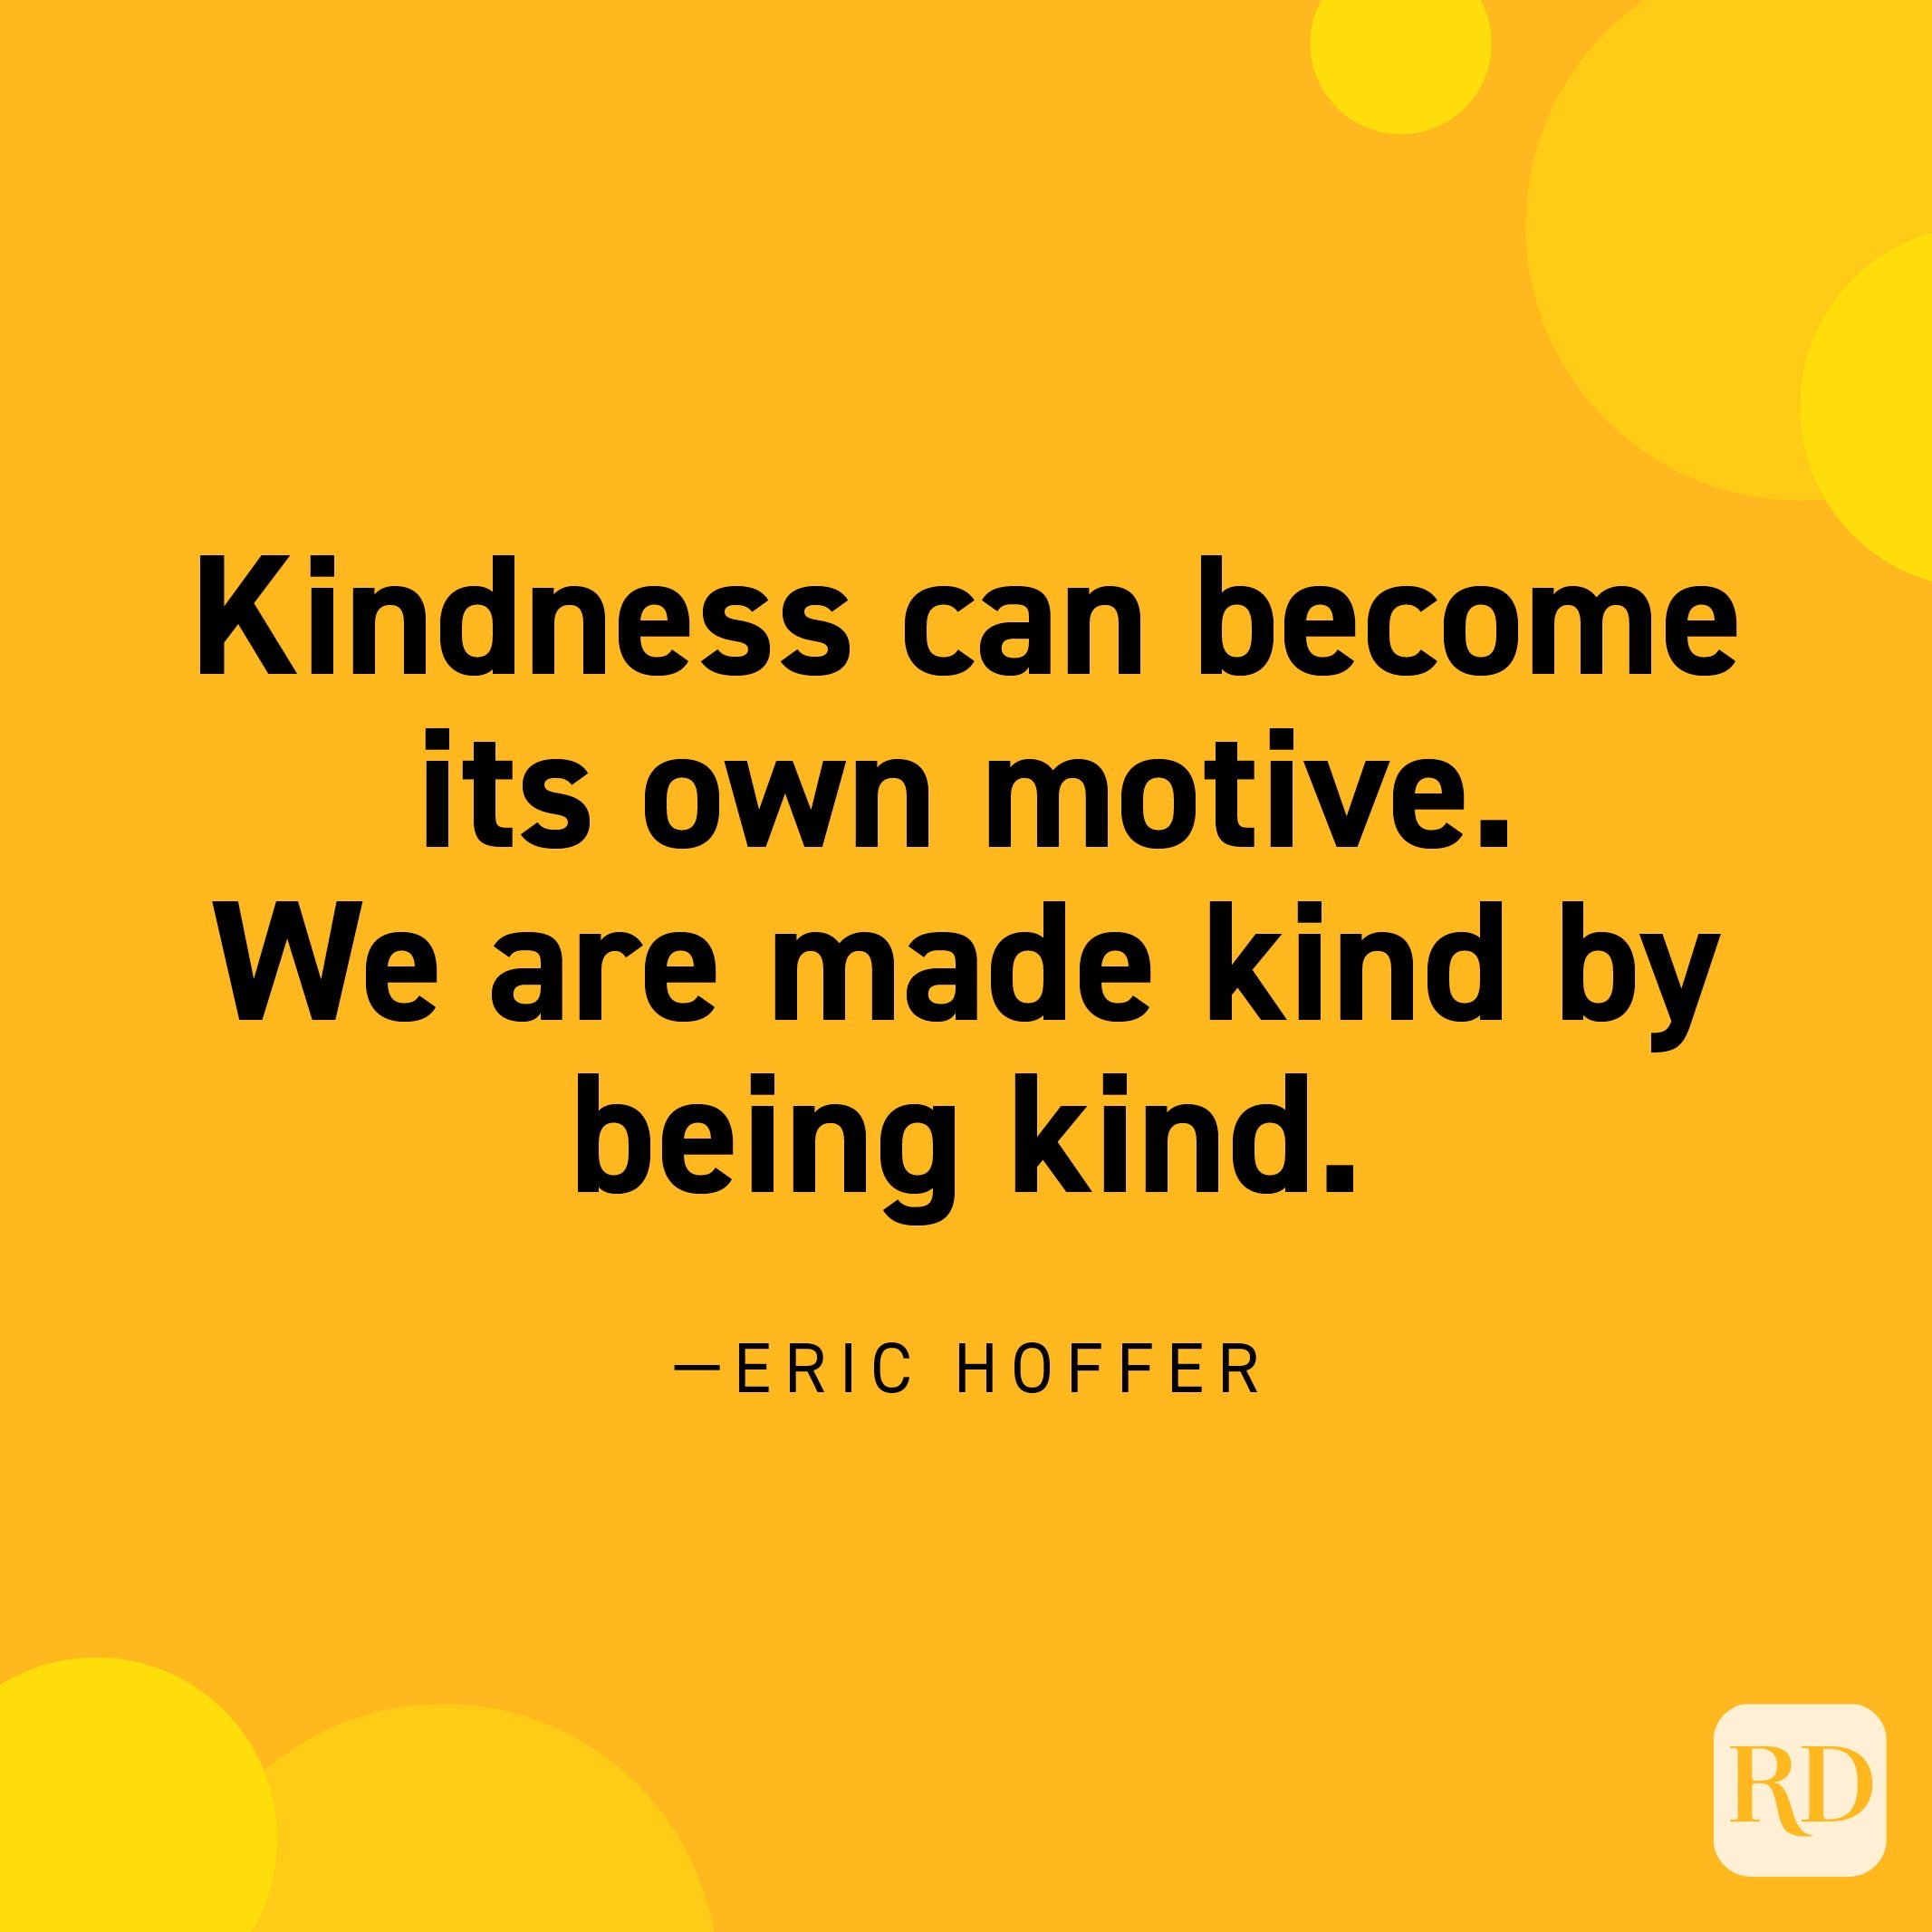 60 Kindness Quotes and Sayings | Quotes About Kindness